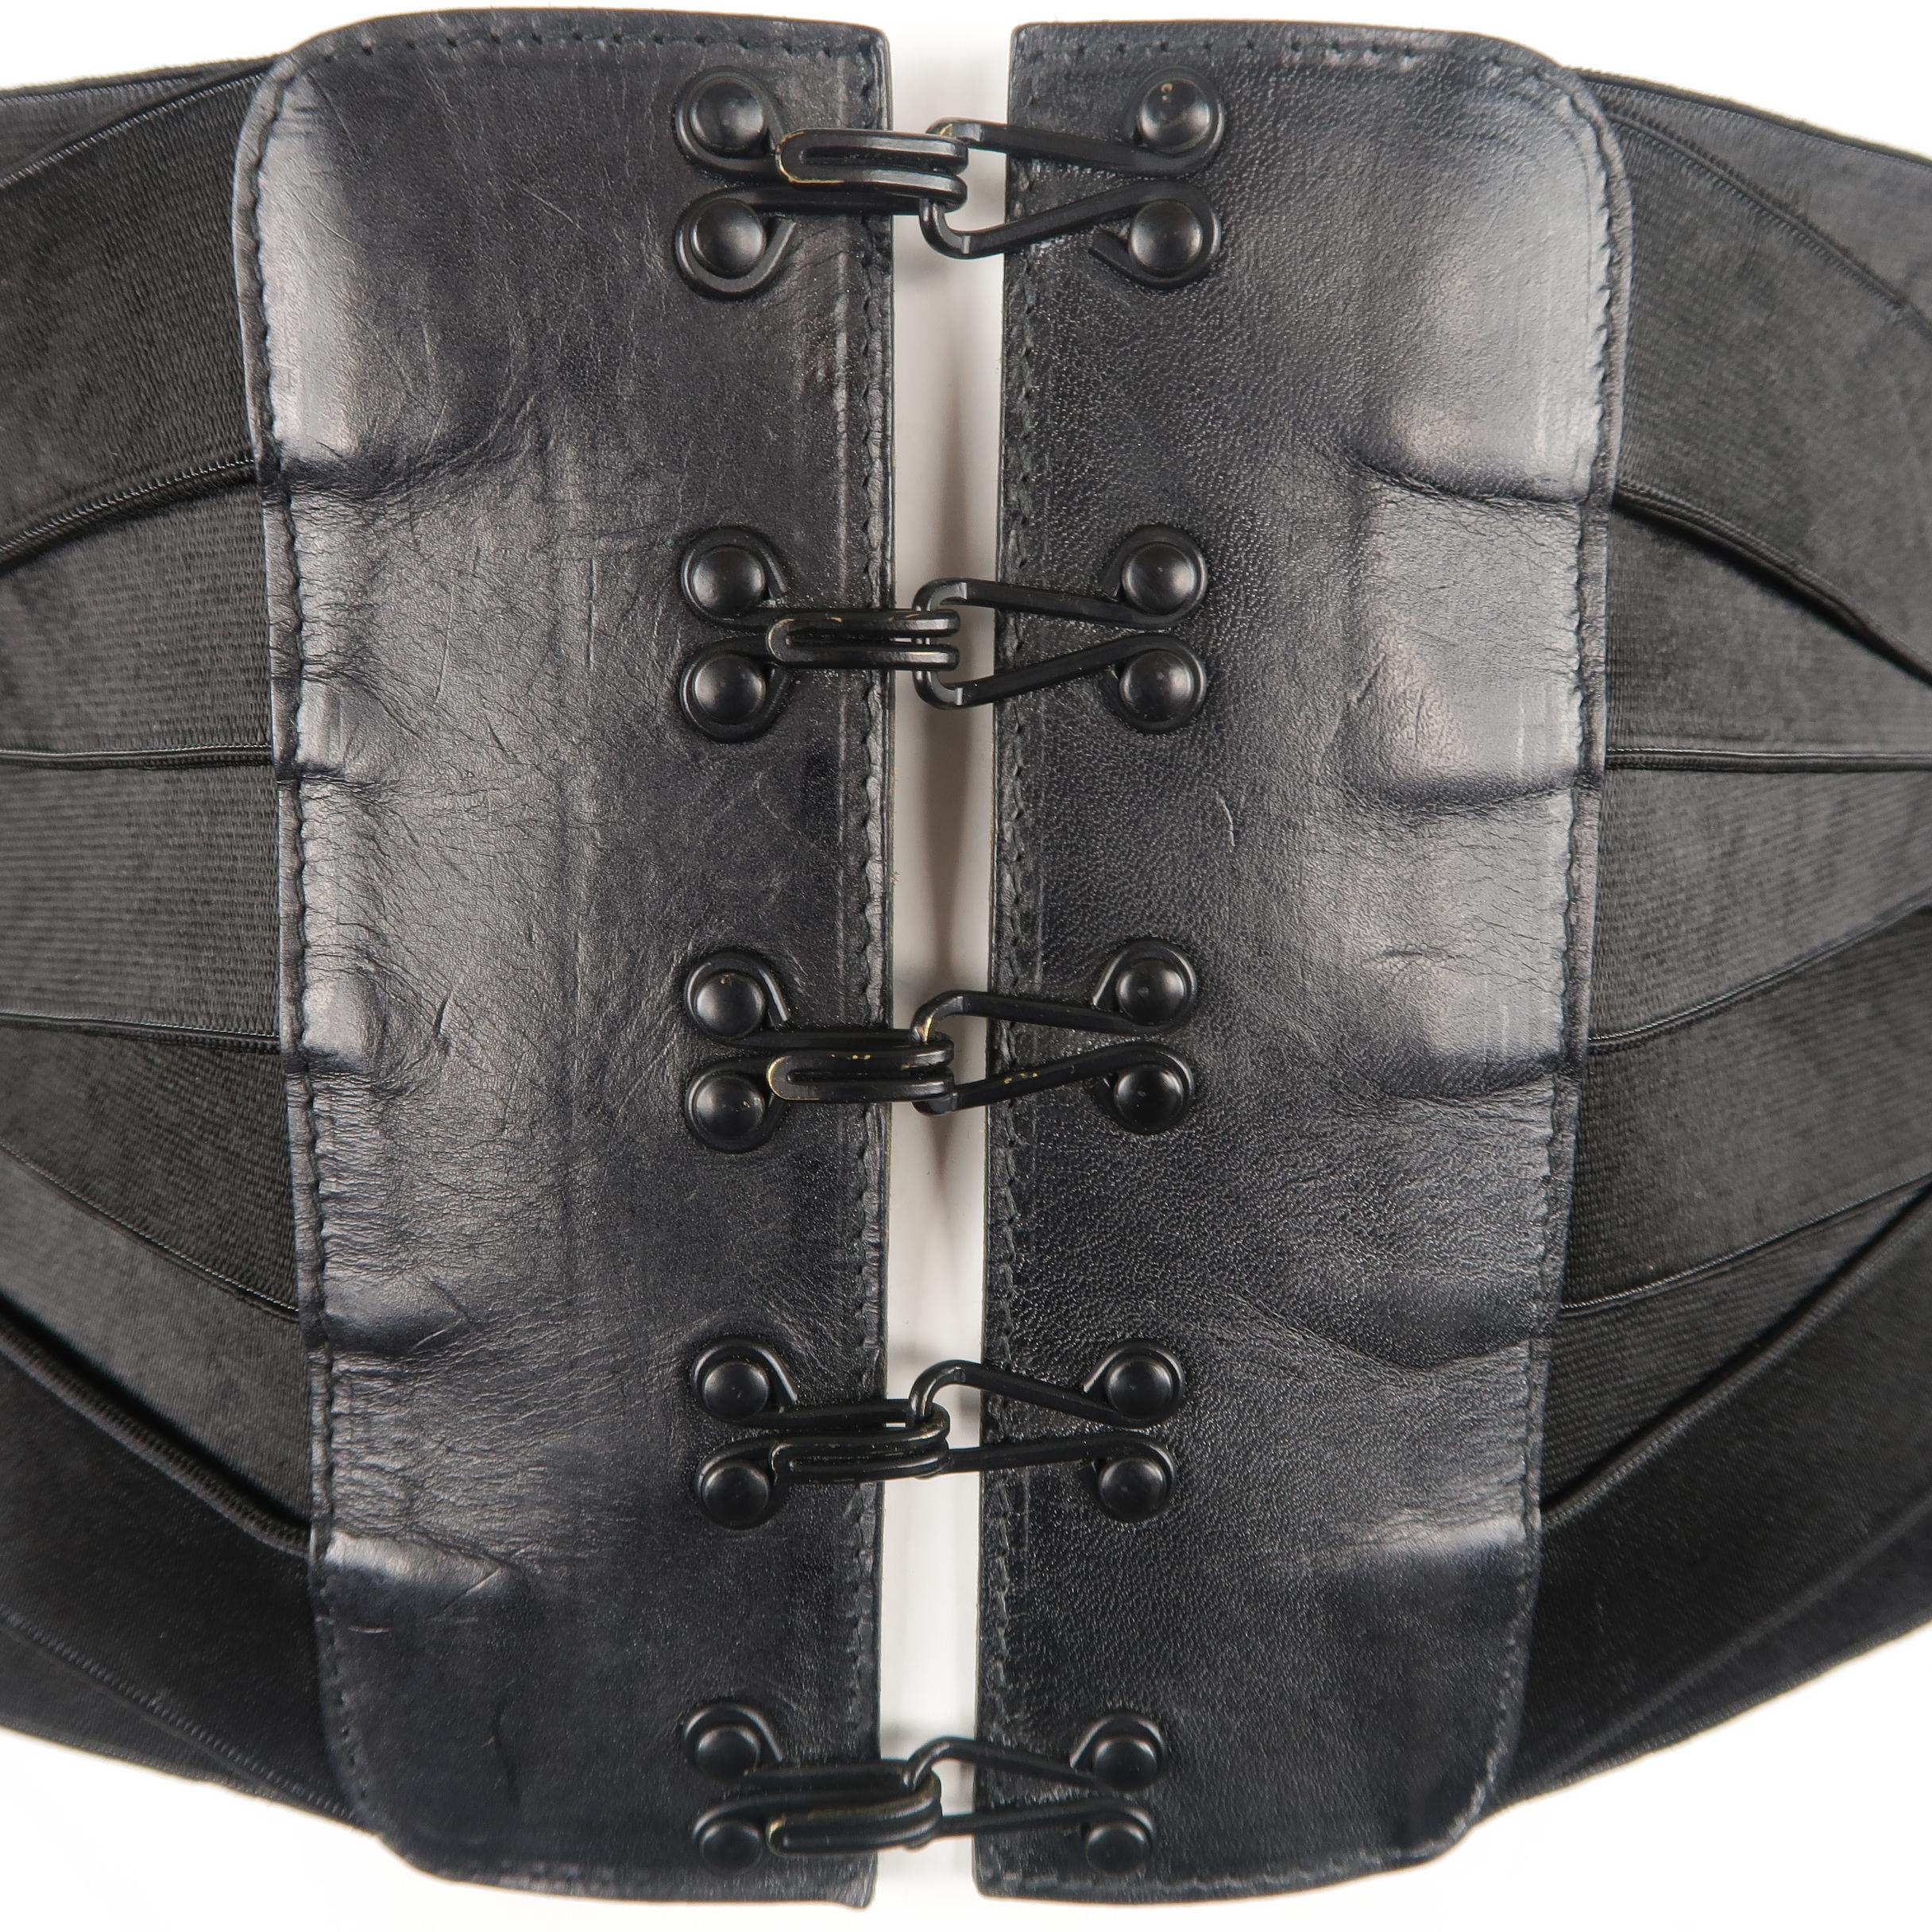 This rare vintage Jean Paul Gaultier  corset belt features eight directionally placed weave effect elastic stretch bands with a leather detailed, oversized hook eye closure. Minor wear on hardware.
 
Good Pre-Owned Condition.
Marked: IT 50
